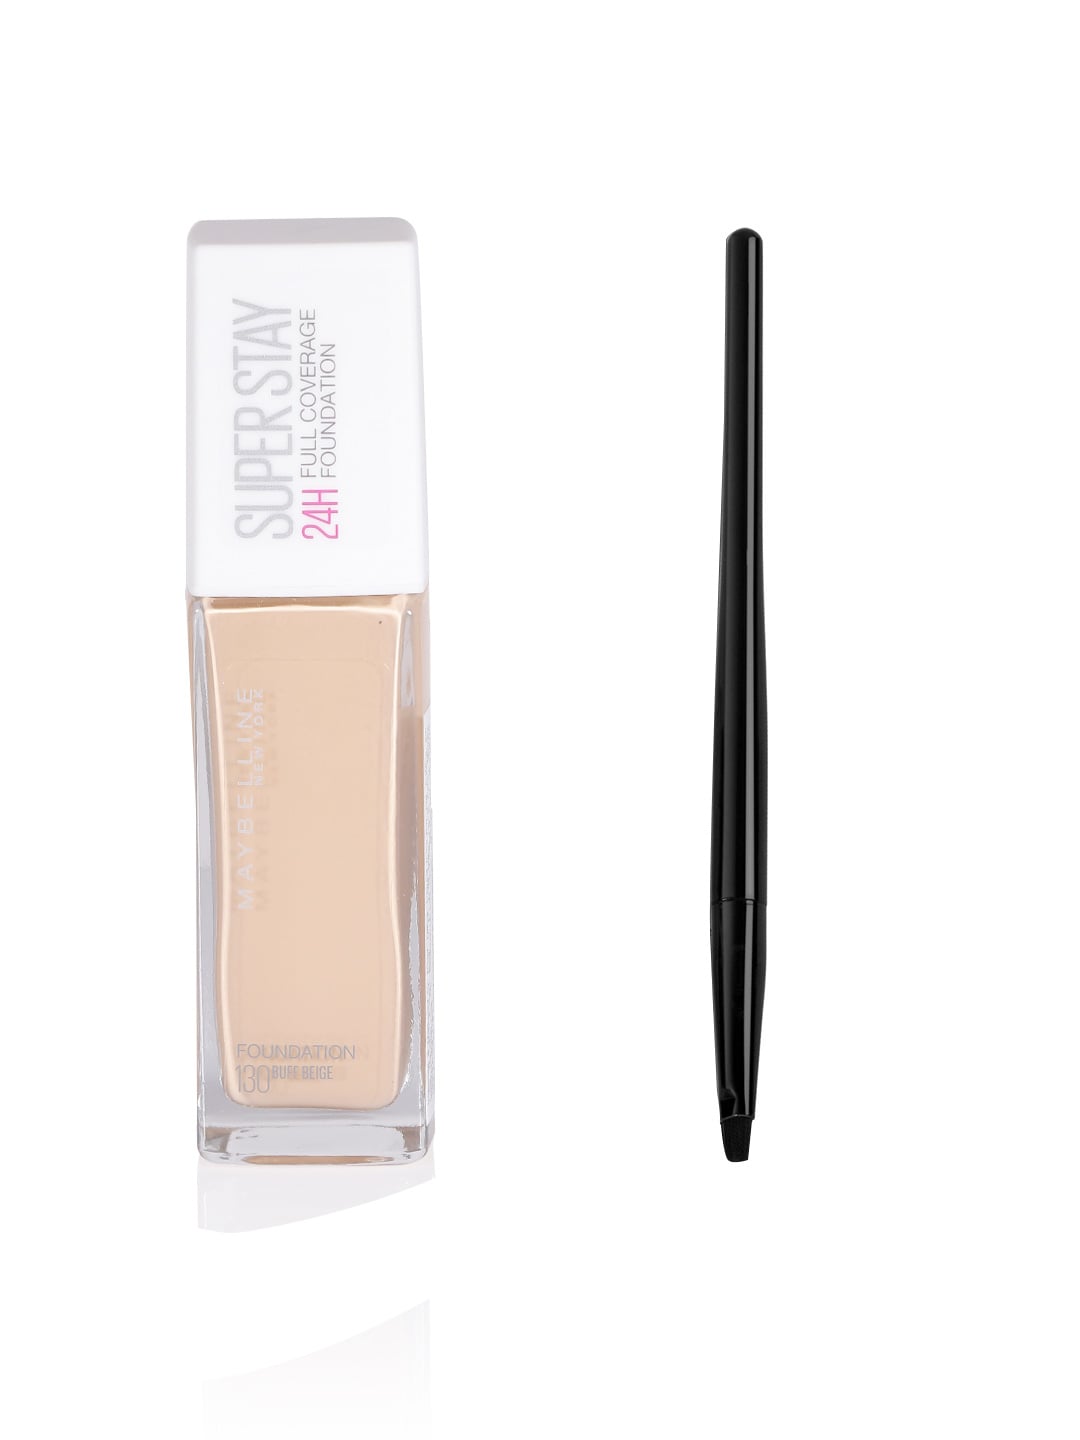 Maybelline New York Lasting Drama Gel Eyeliner and Super Stay Full Coverage Foundation Price in India